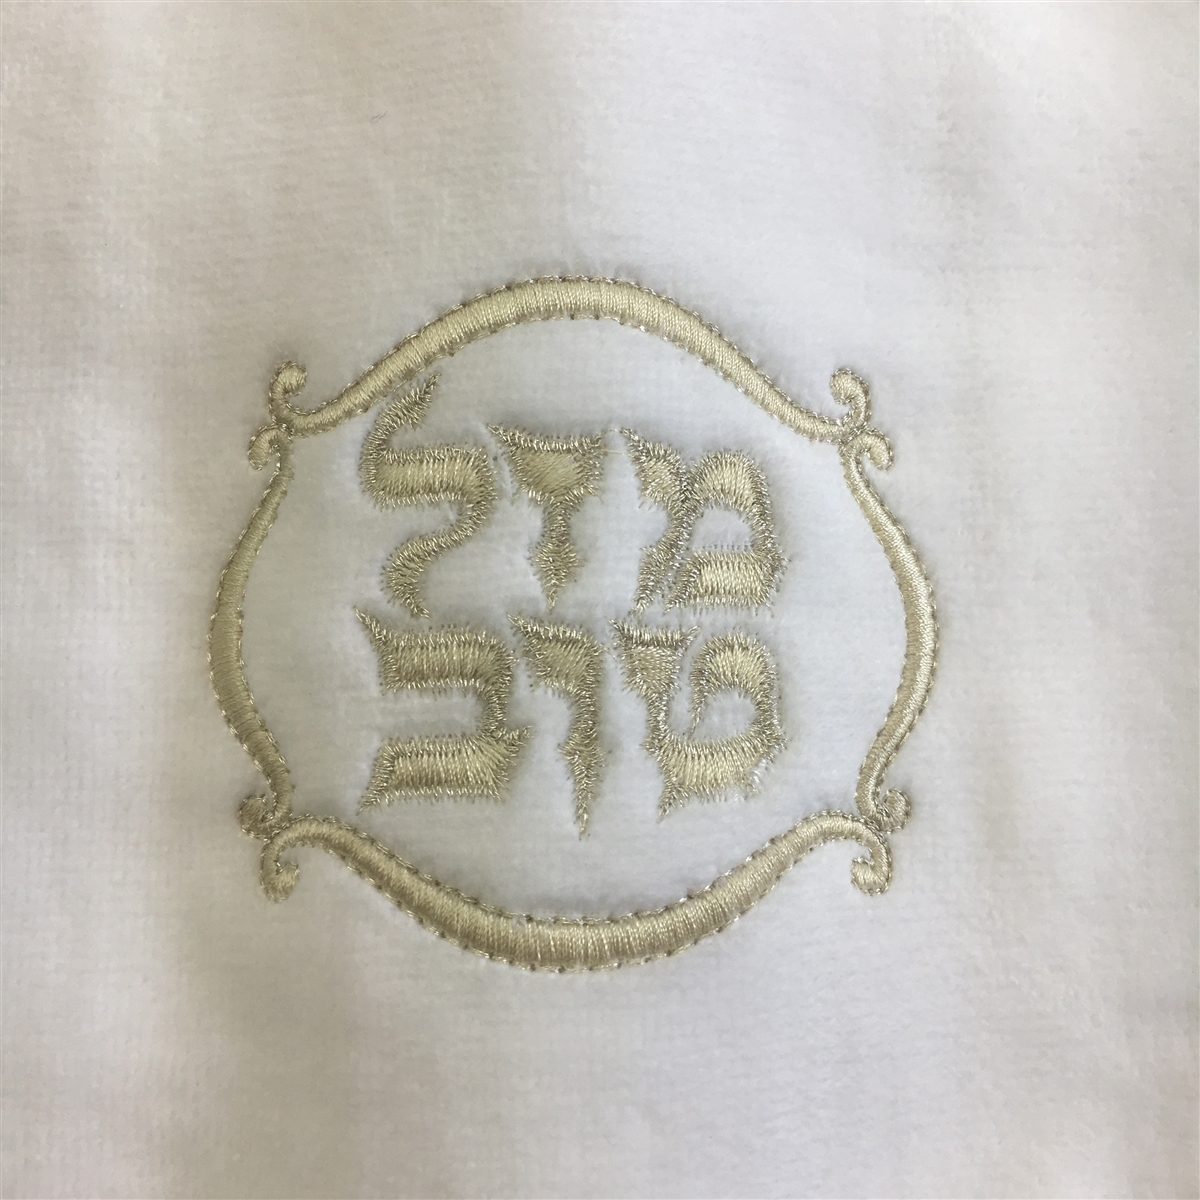 Mazel Tov Fingertip Towel Set - Ivory or White Towels with Golden Embroidery